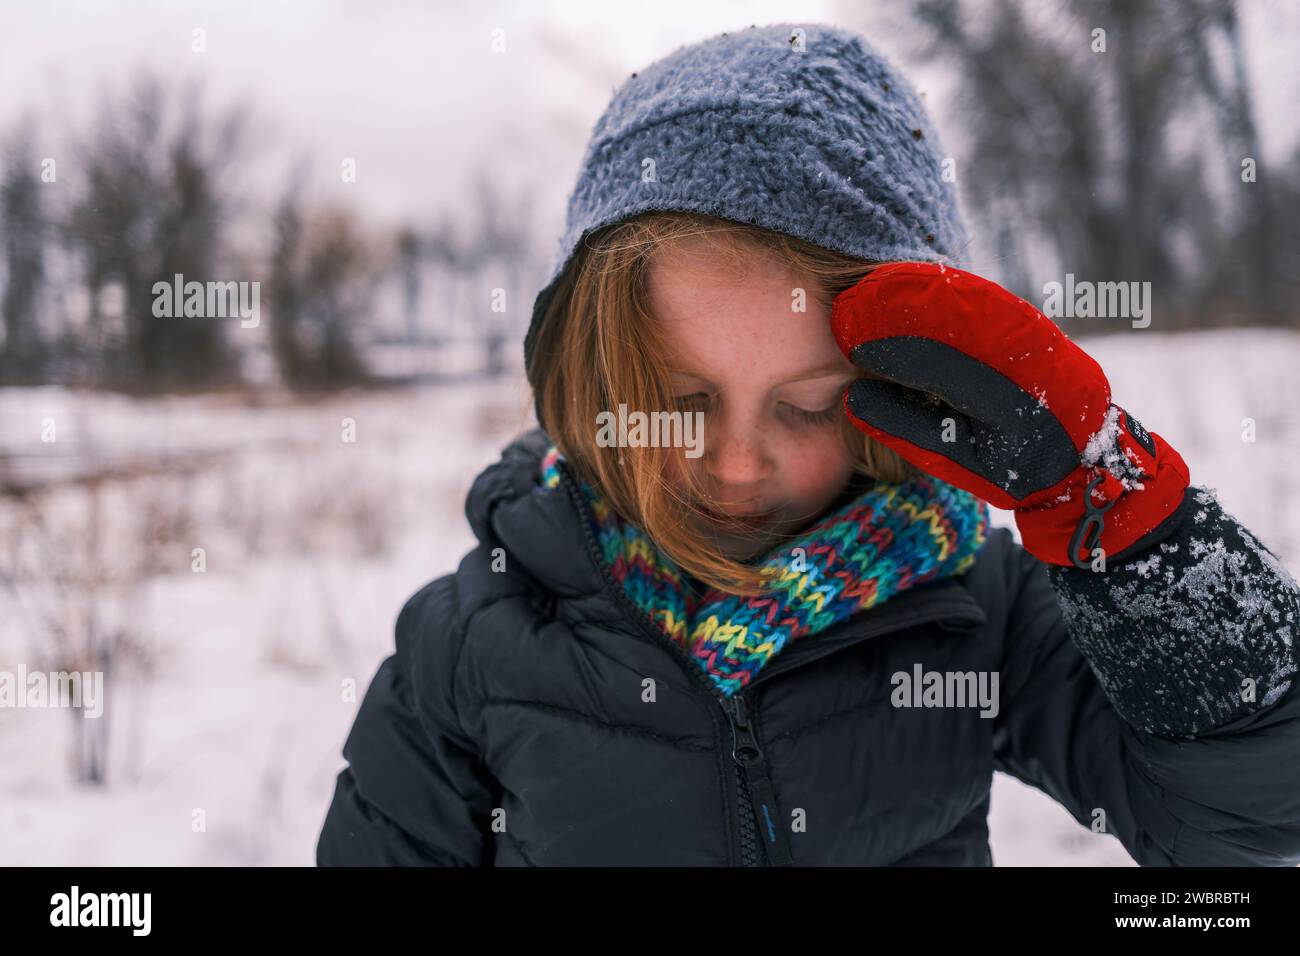 Young child in winter clothing with hat, scarf, and gloves Stock Photo